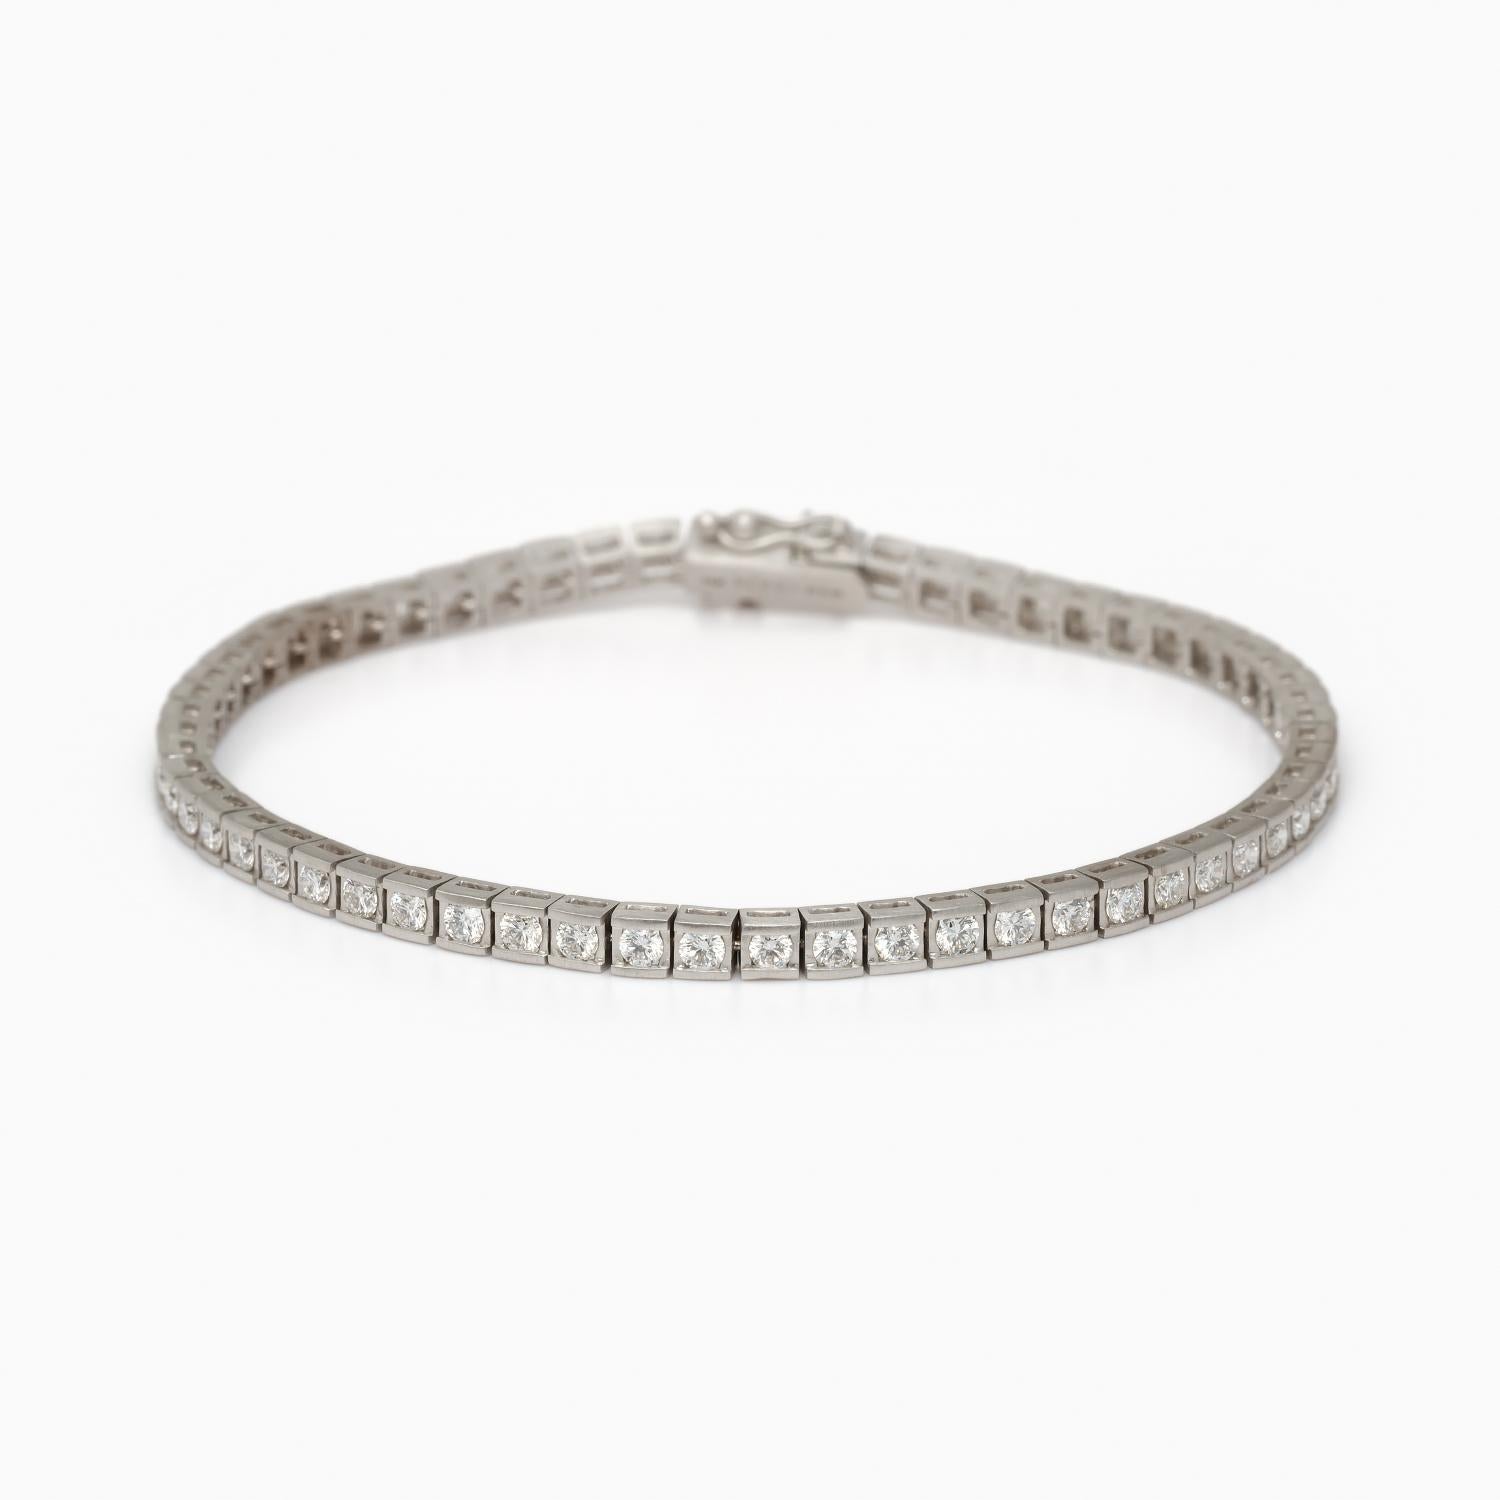 This bracelet is sturdy yet dainty and elegant. The most beautiful tennis bracelet on the market. Genuine Diamond Tennis Bracelet. It is thicker and bigger than it appears in the photos.

Solid 18k White Gold. 100% blended in house for a unique rosy